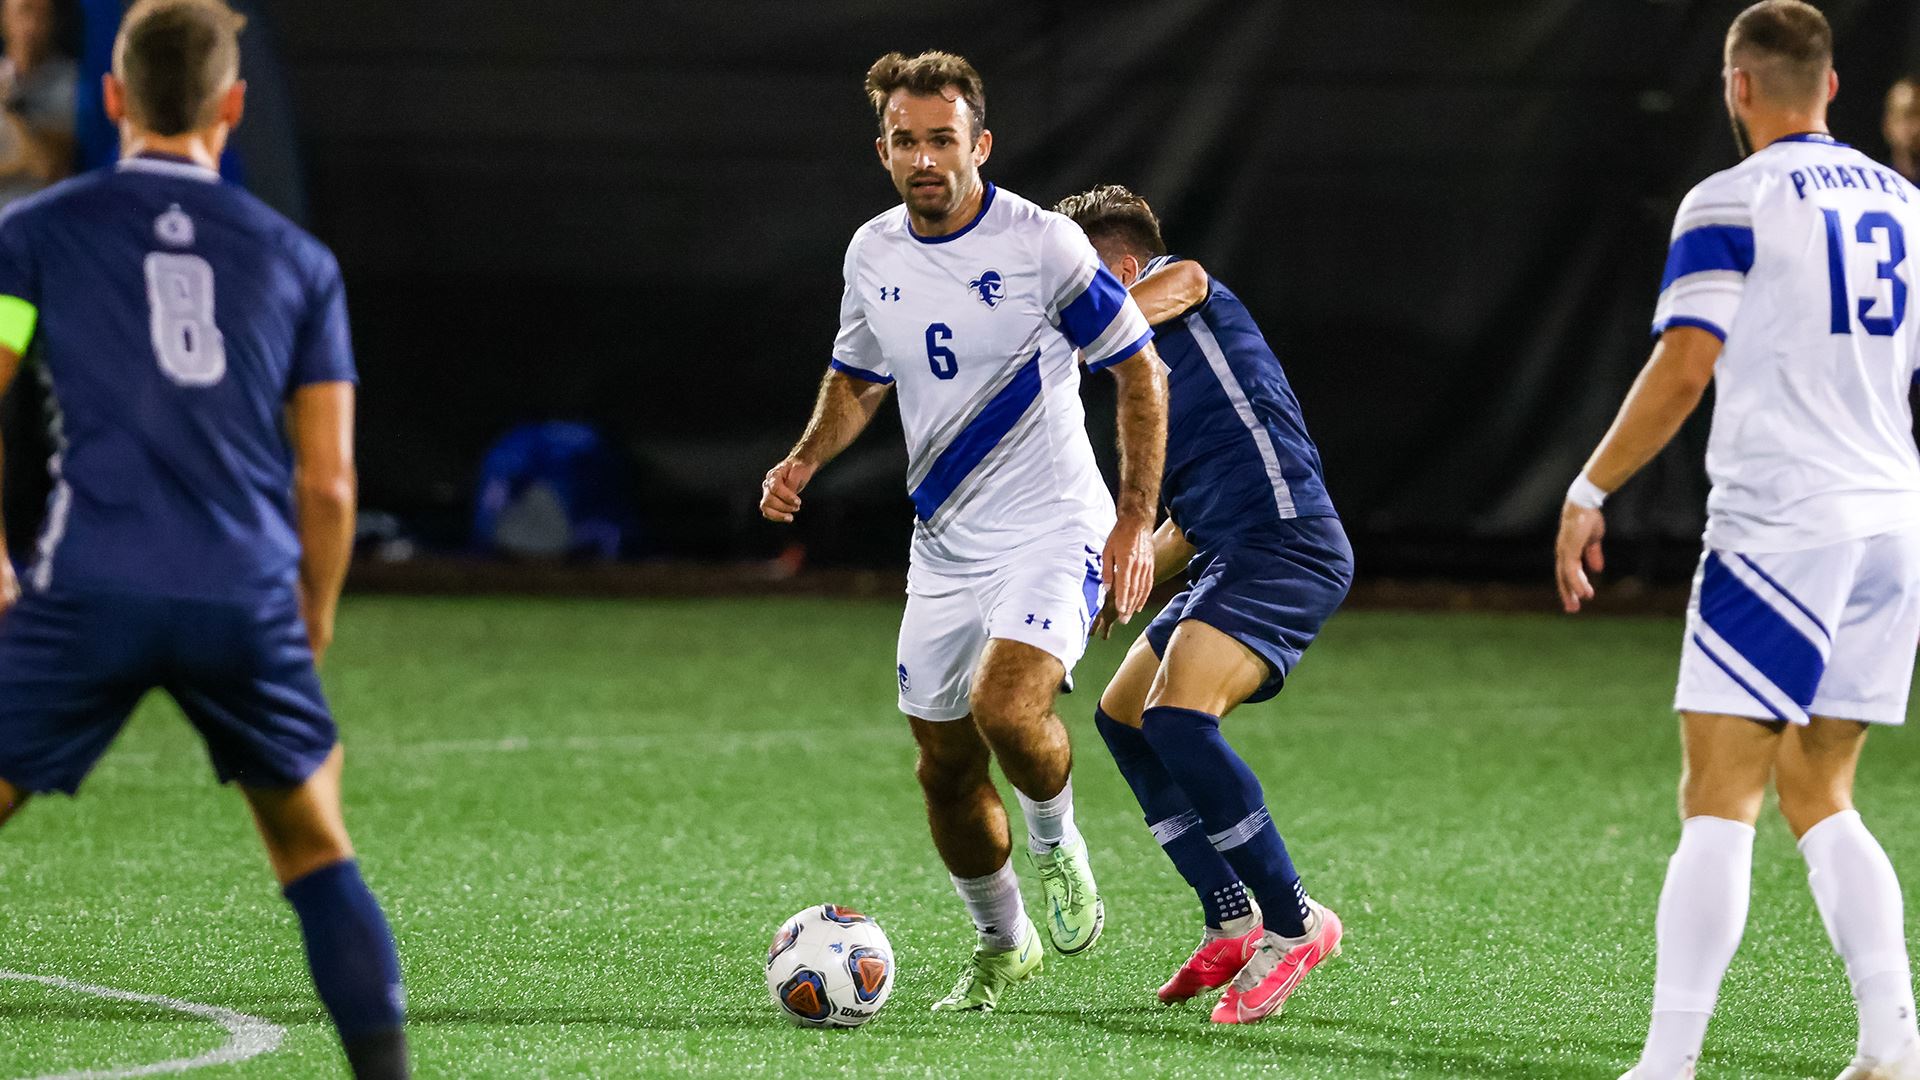 A Seton Hall men's soccer player dribbles the ball against defenders during a game.